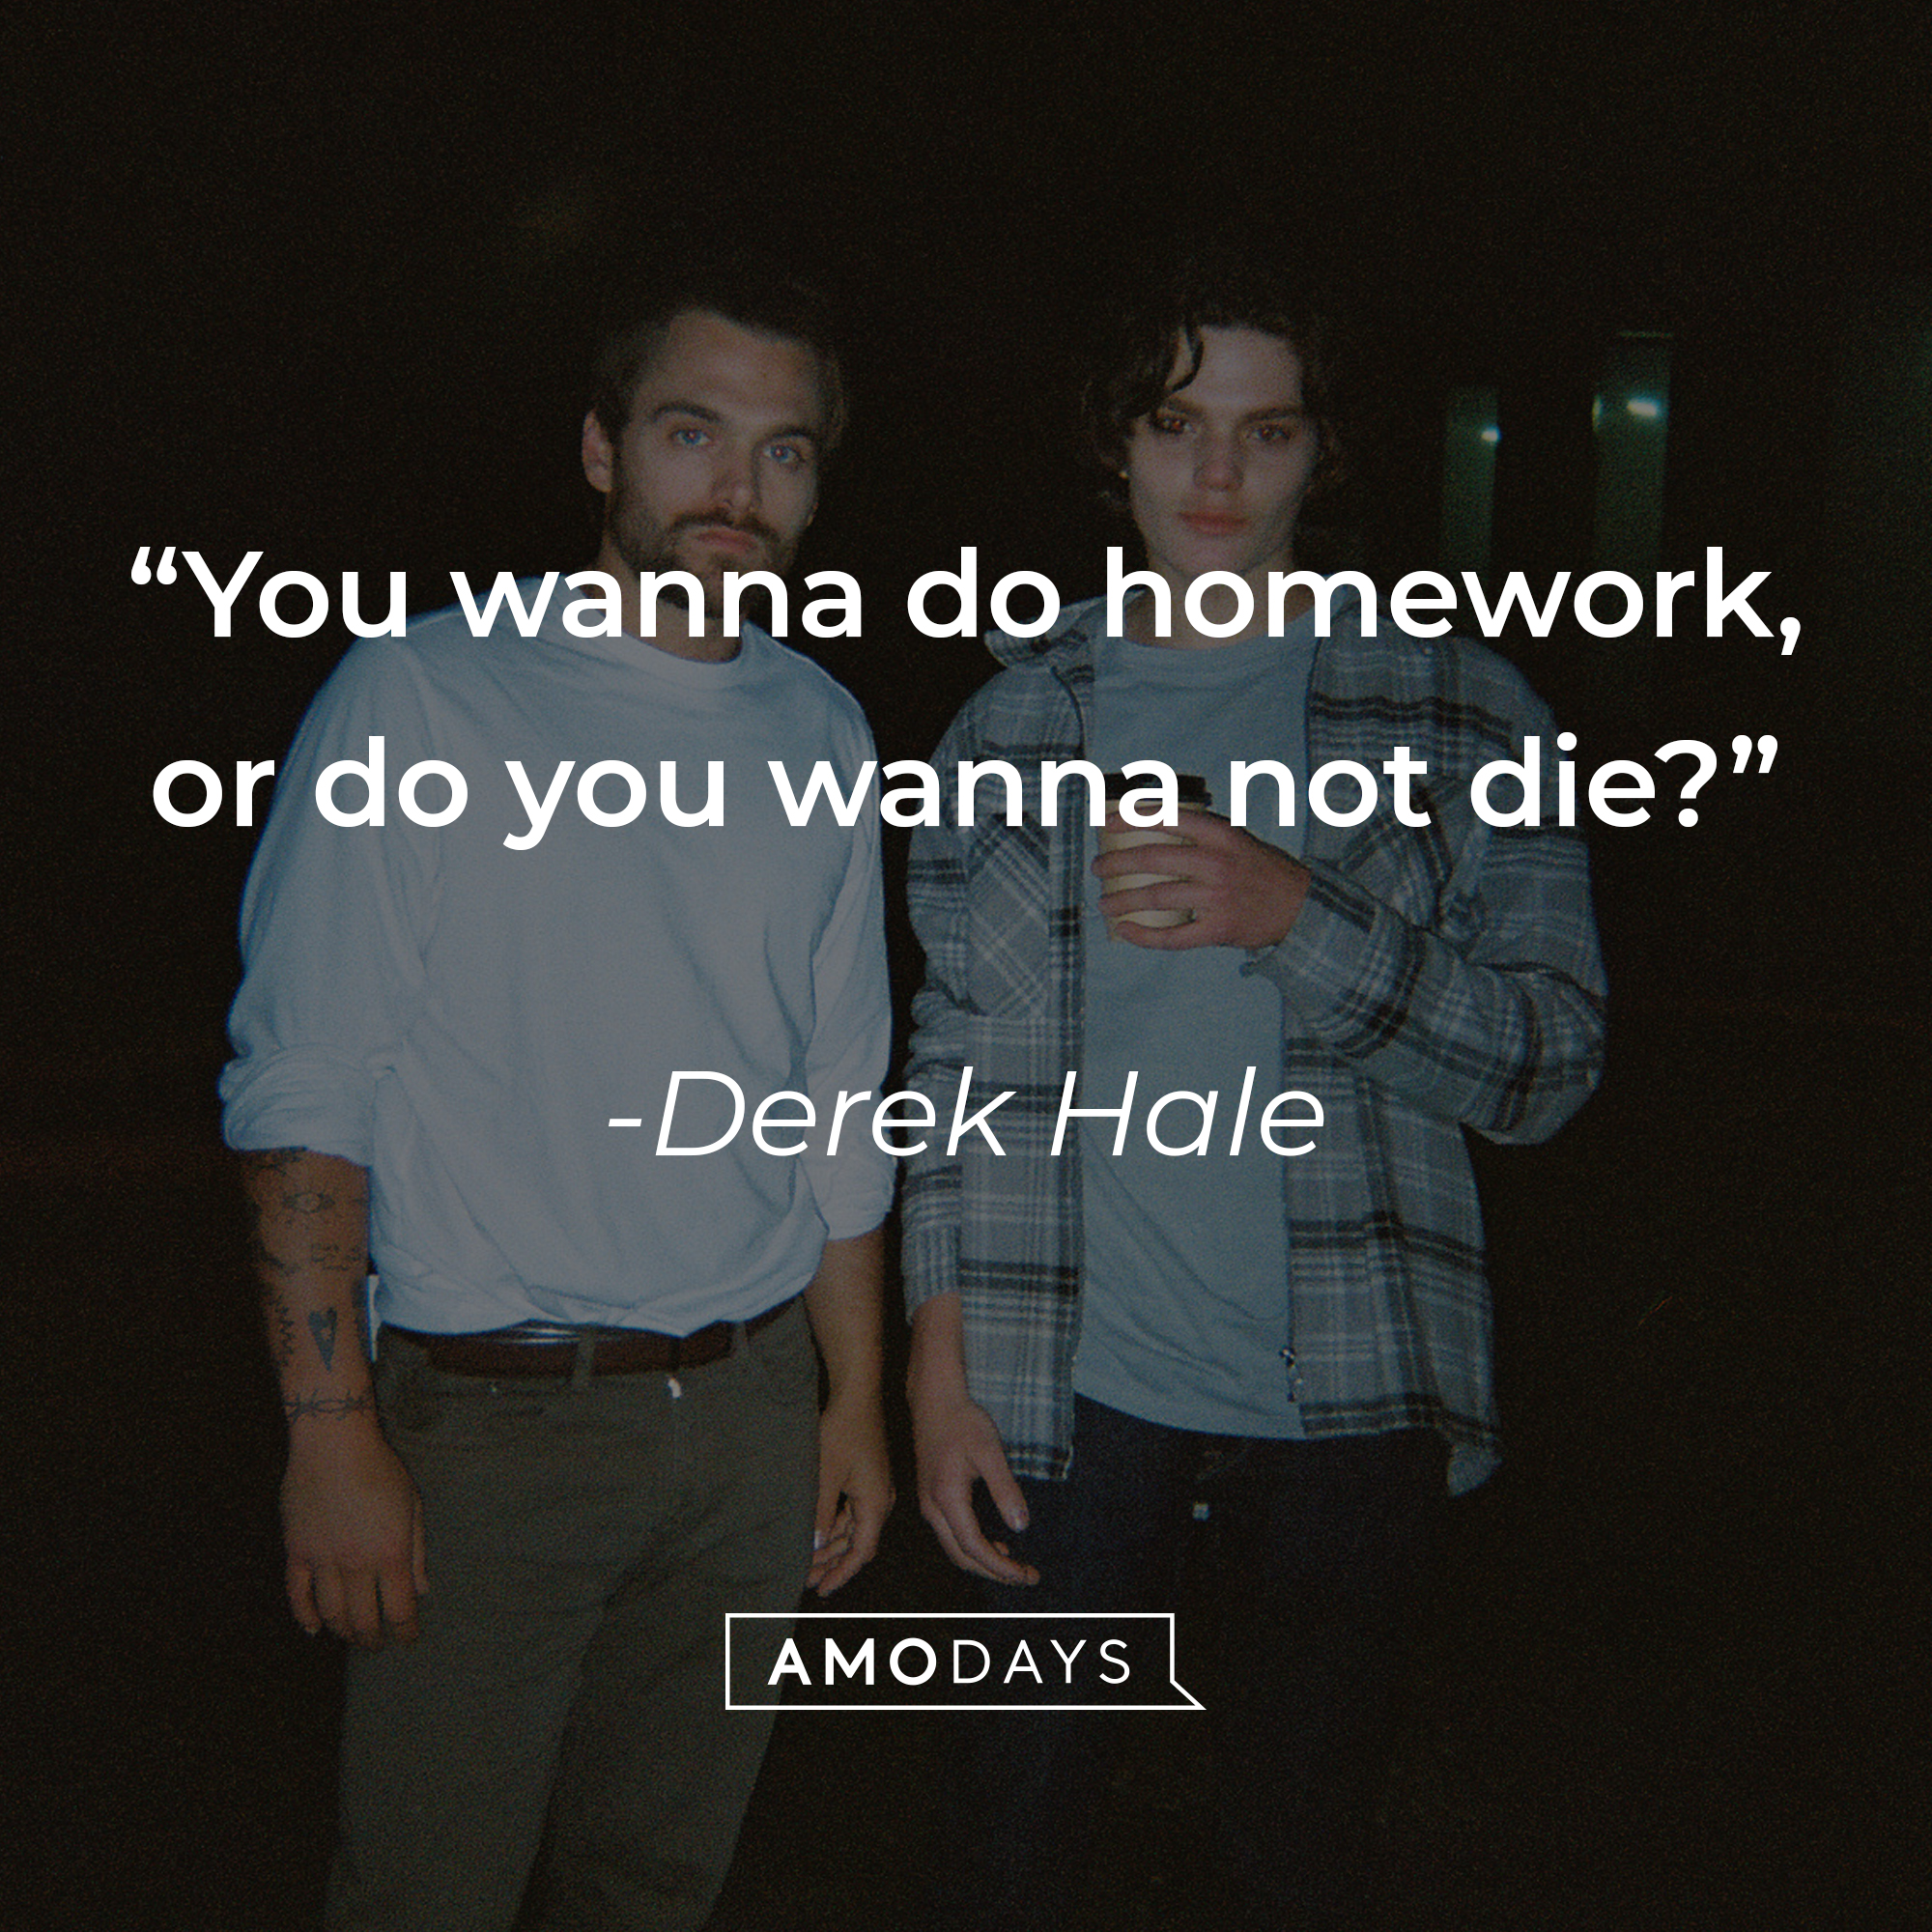 Derek Hale, with his quote: "You wanna do homework, or do you wanna not die?" | Source: Amodays